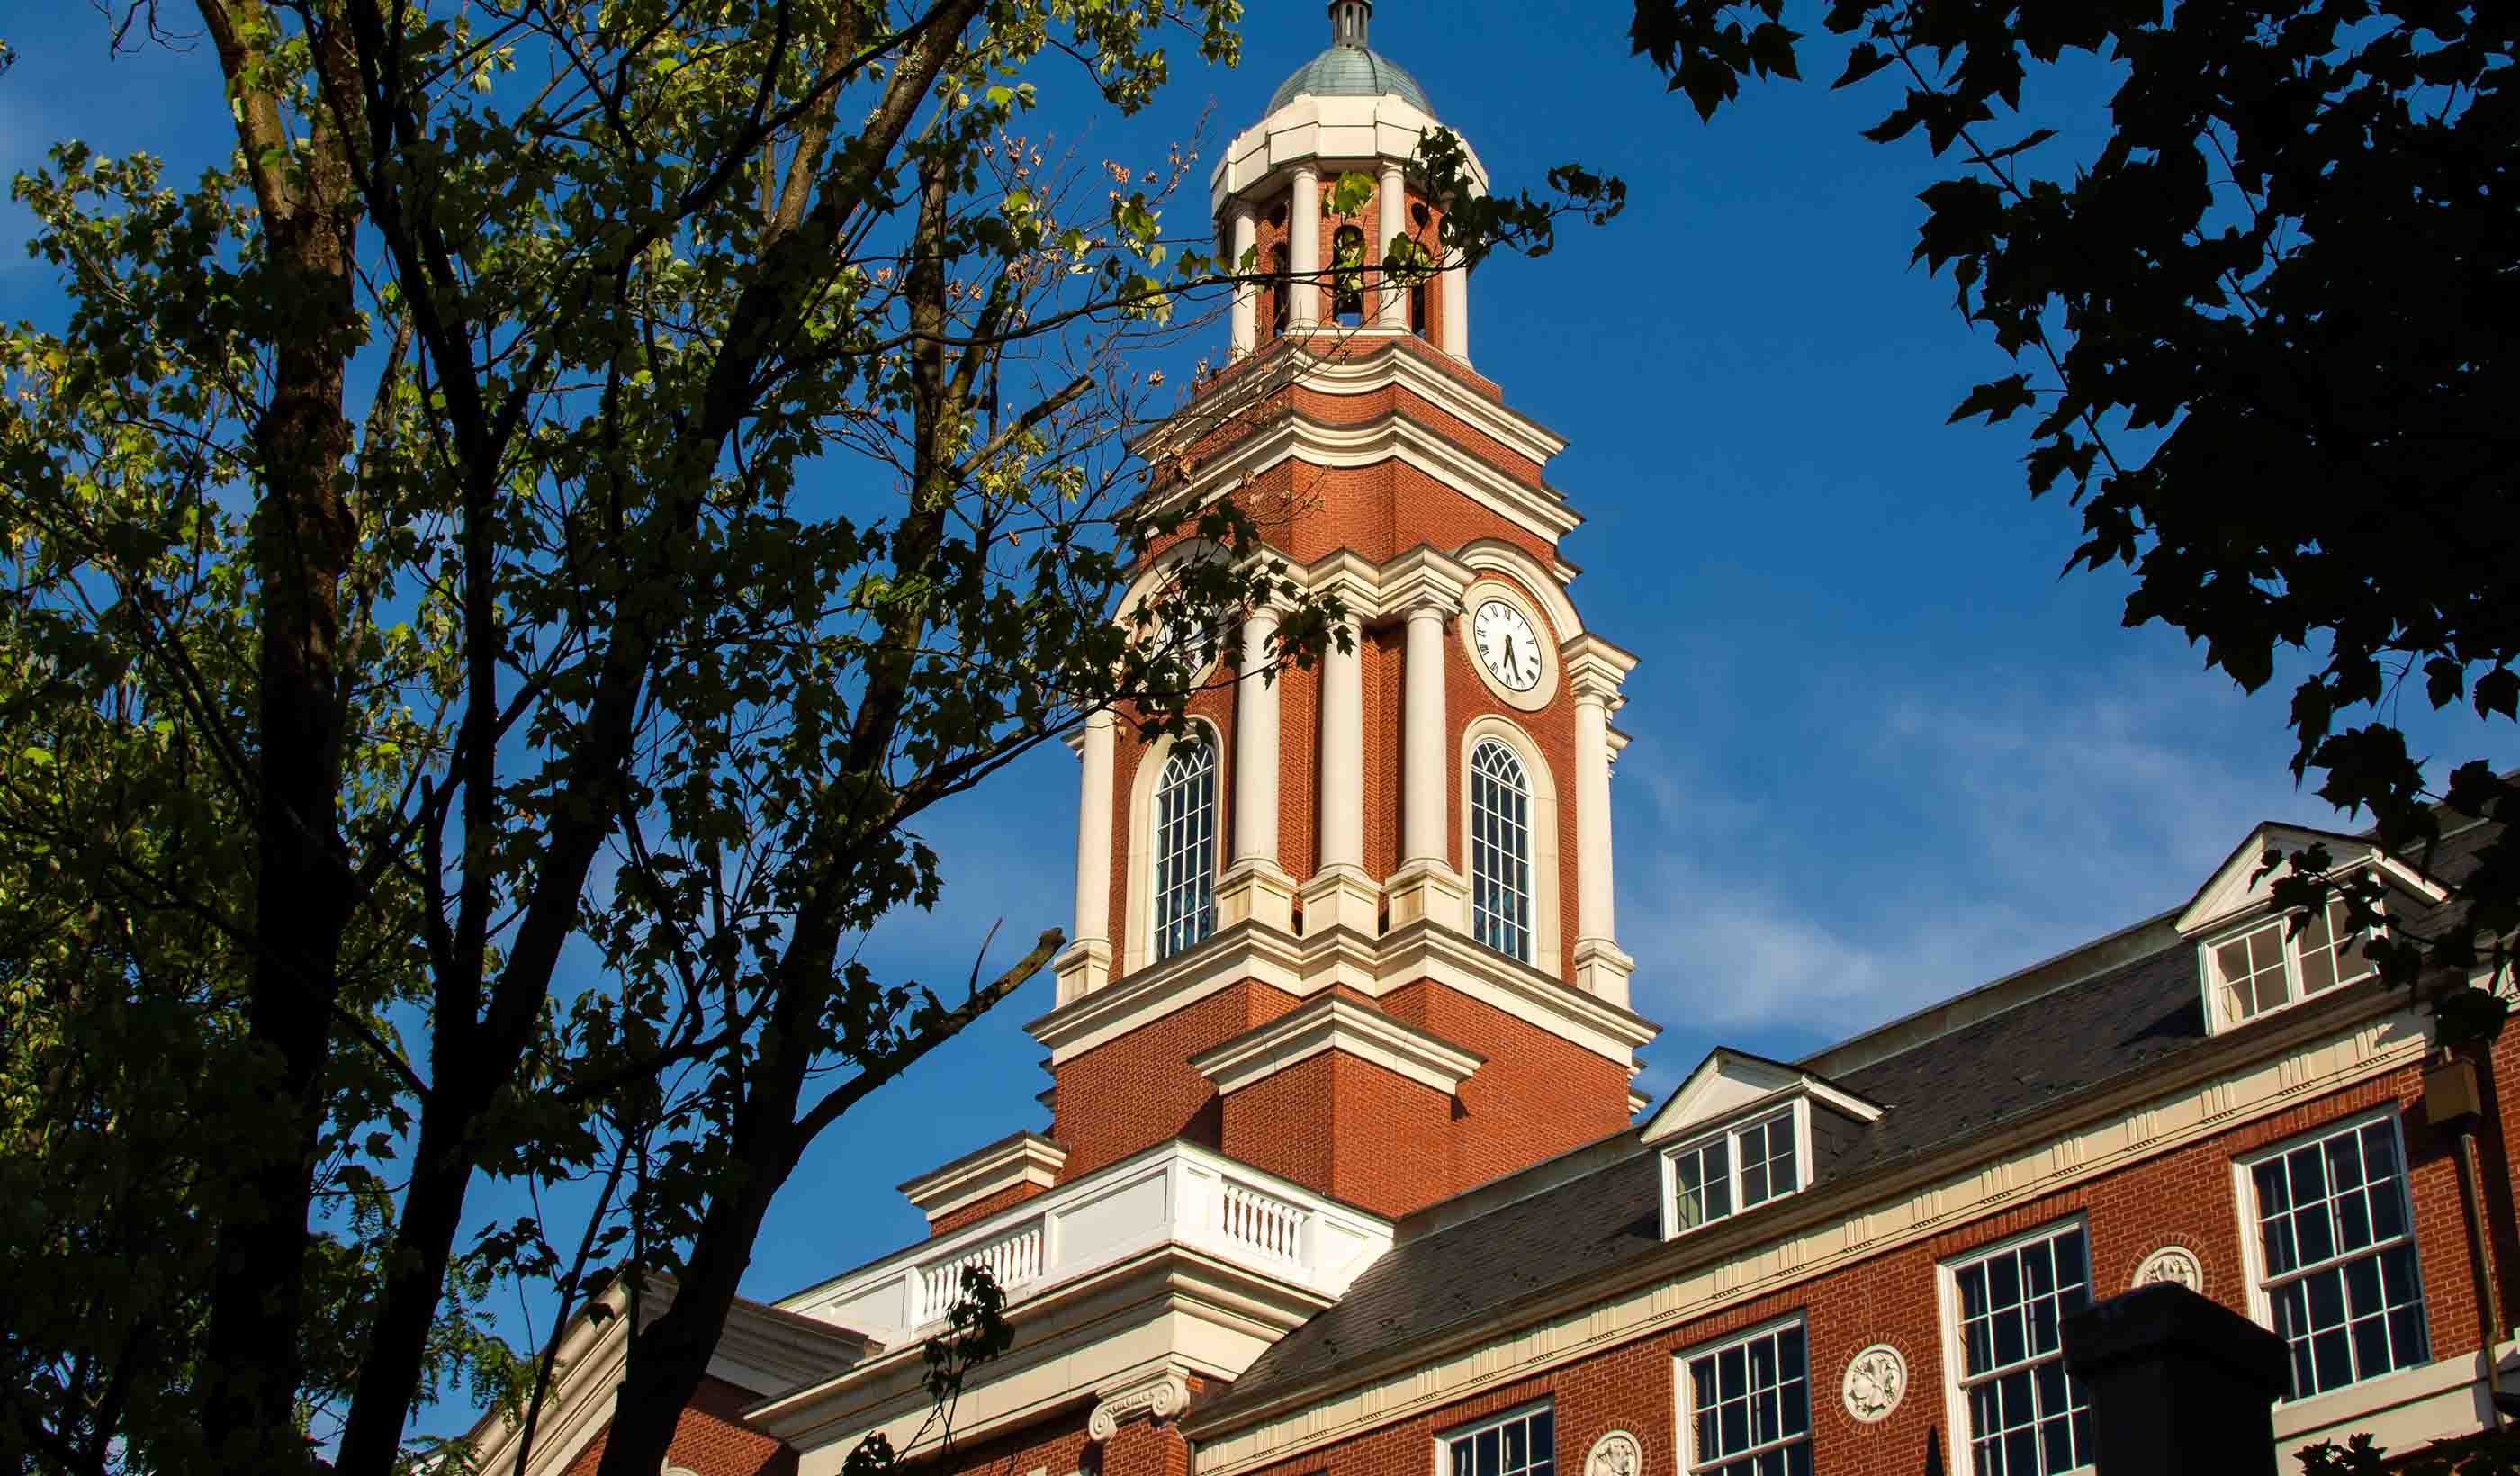 Creating connections with Howard University